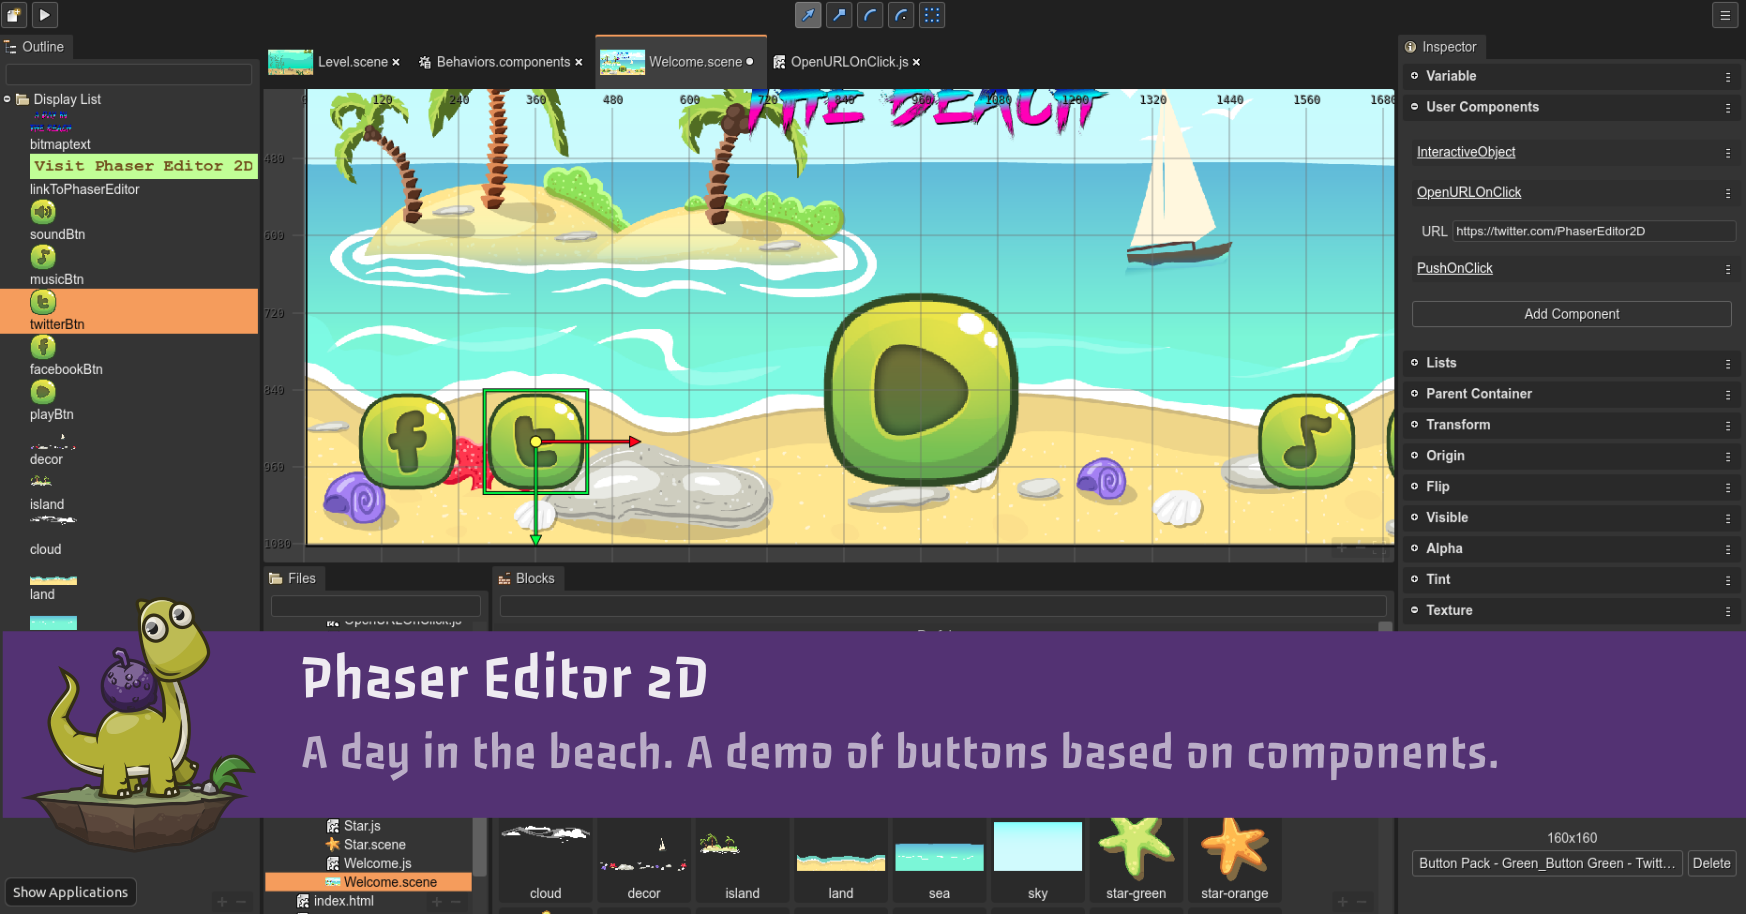 [Tutorial] A day in the beach. A demo of buttons based on components.